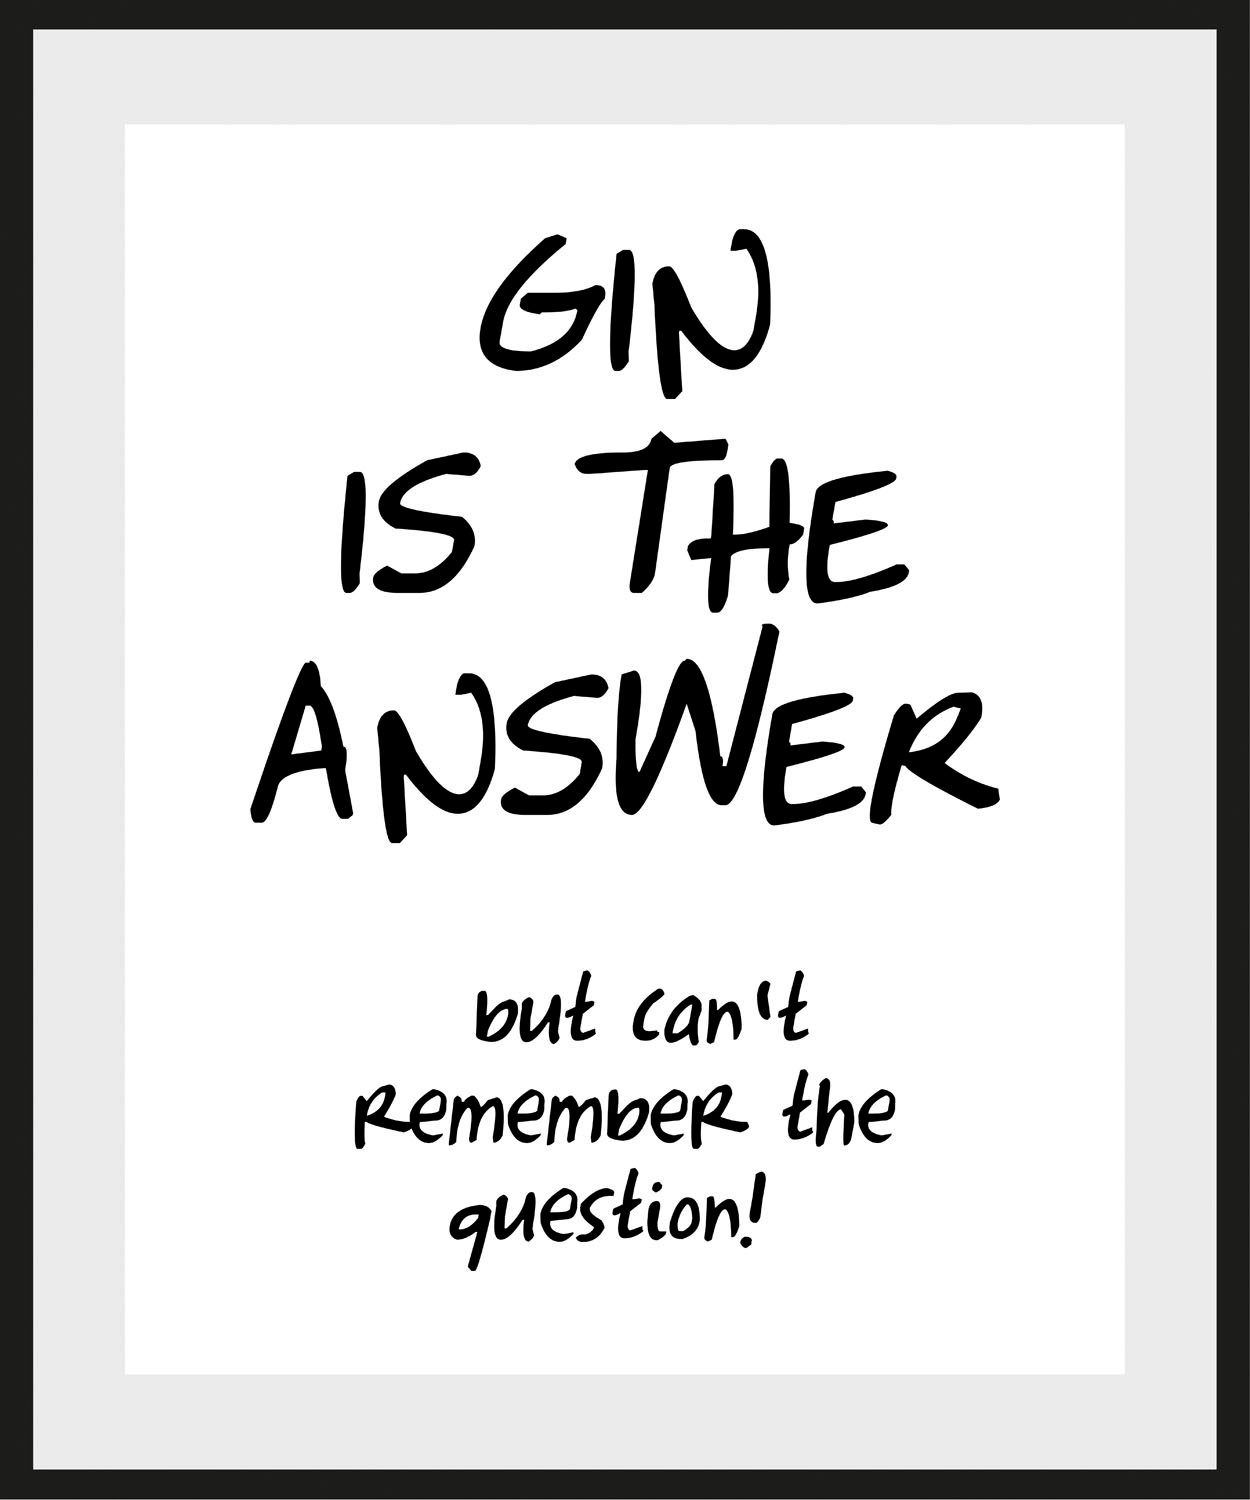 Bild THE (1 IS queence ANSWER, St) GIN